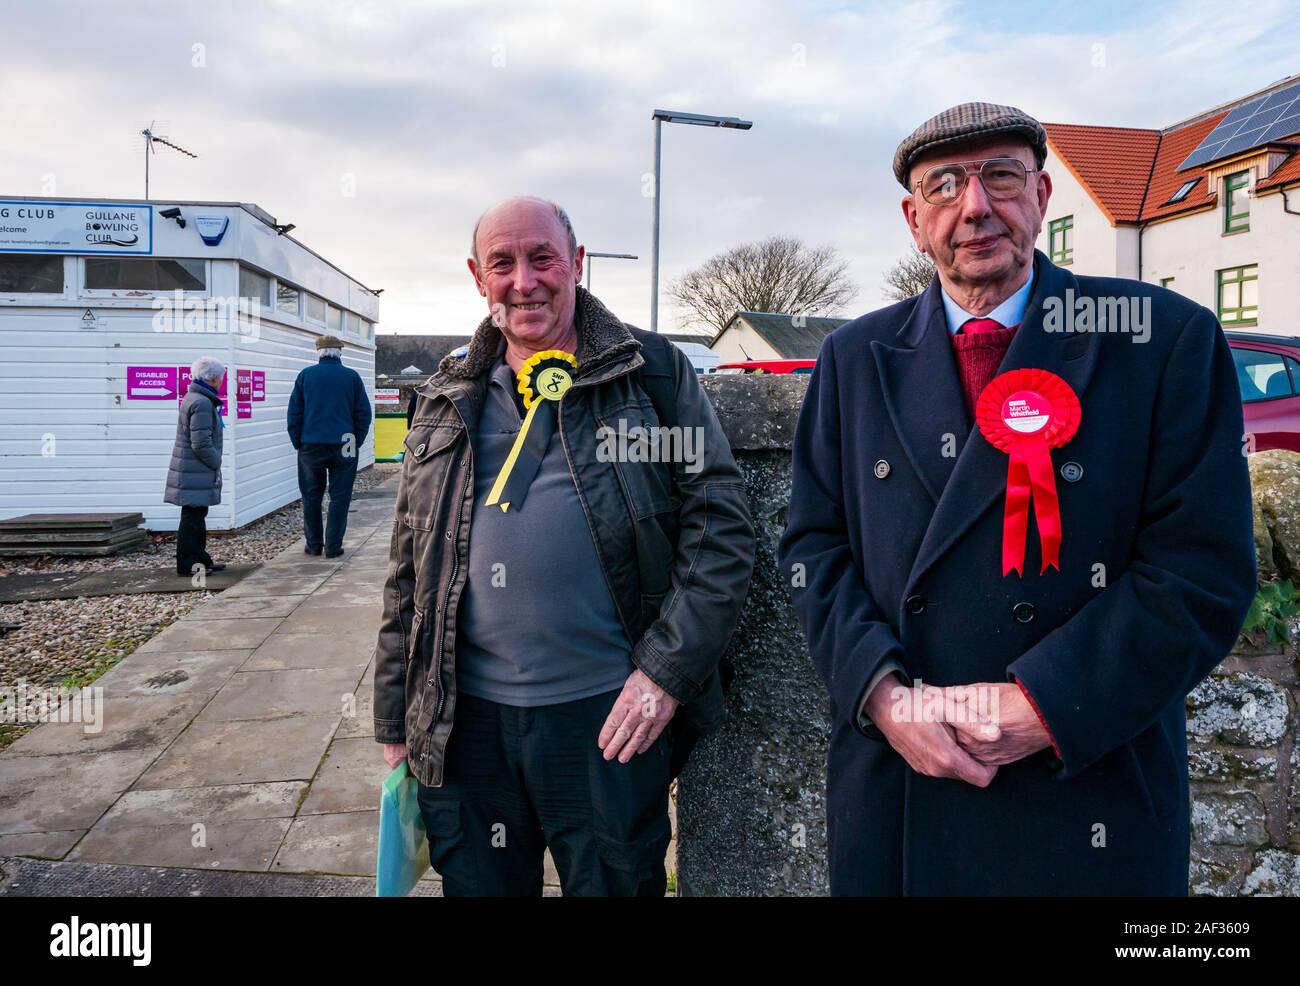 Gullane Bowling Club, East Lothian, Scotland, United Kingdom, 12th December 2019. UK election: John Beard, local SNP convener and Scottish Labour Party councillor Jim Goodfellow at the local polling place. Stock Photo